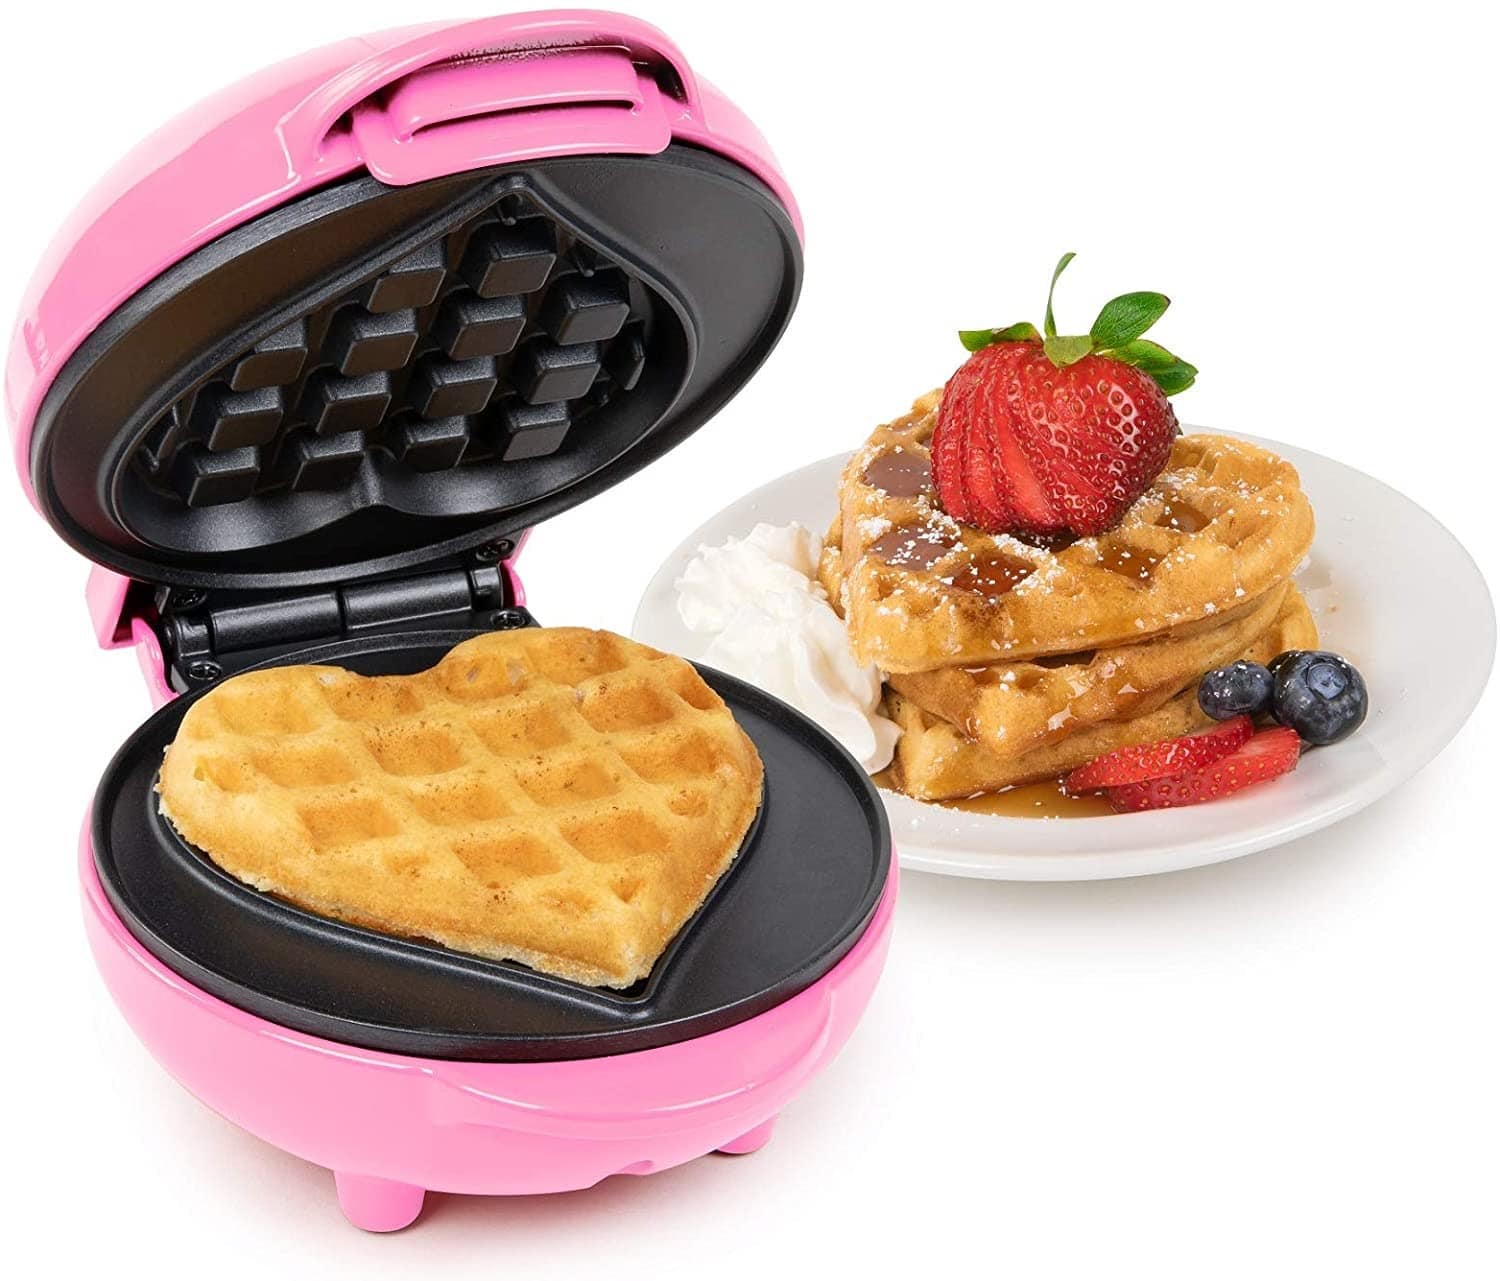 The 10 Best Small Waffle Makers of 2021